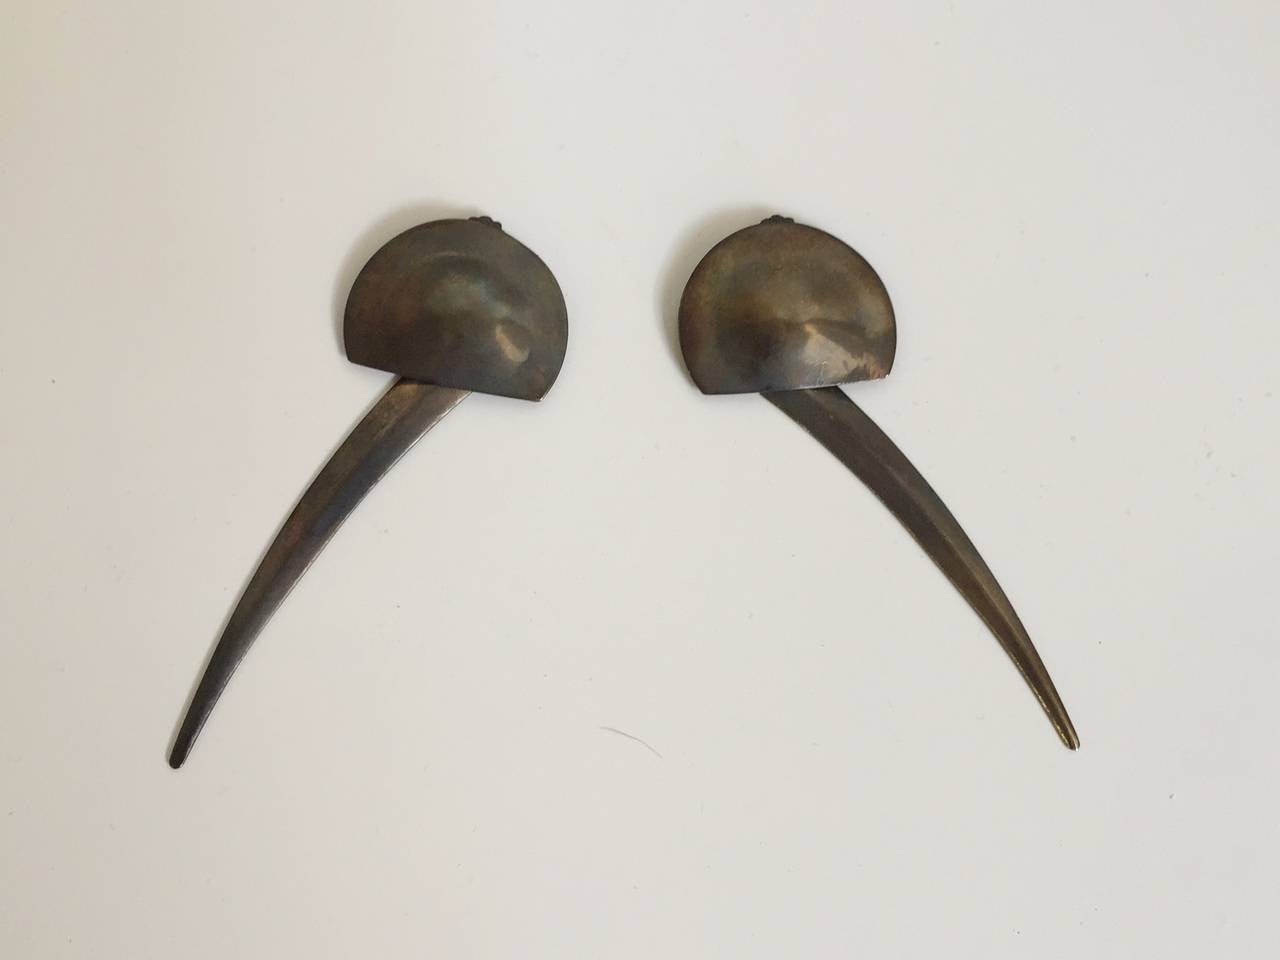 Patrick Kelly Paris 1987 sting ray design silver clip on earrings that the tail part swings!  There earrings are from the private collection of Carol Martin who was a long time friend & model to Patrick Kelly. Carol Martin wore these earrings at a